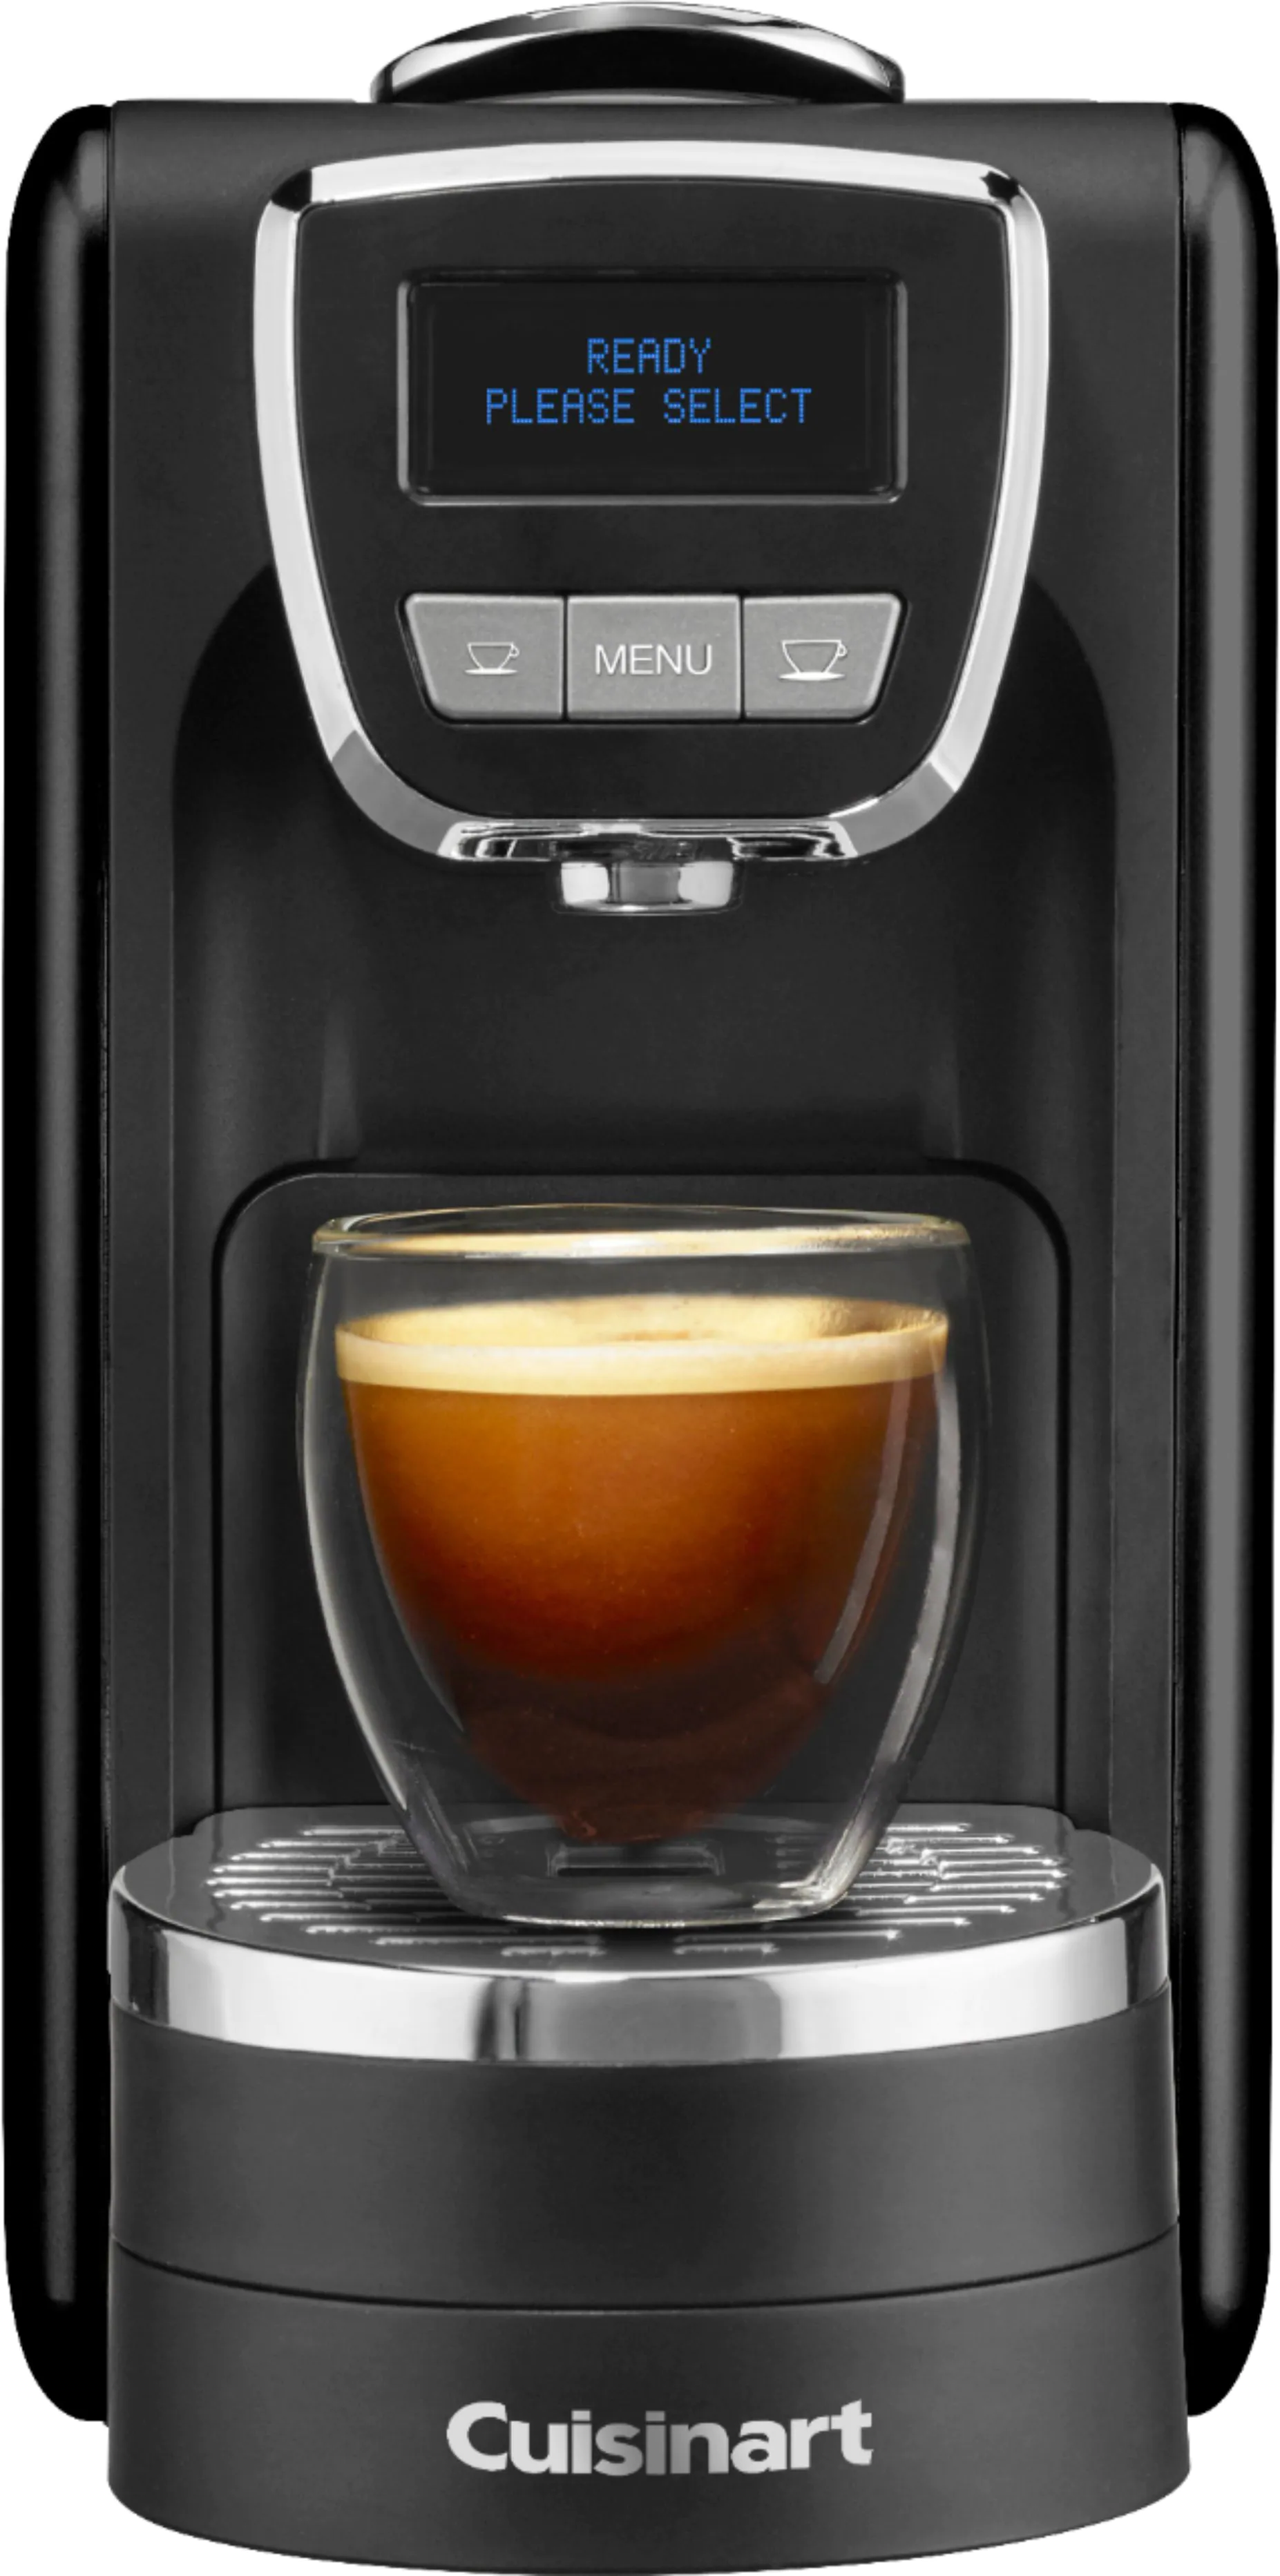 Cuisinart – Espresso Machine On Sale Today Only!